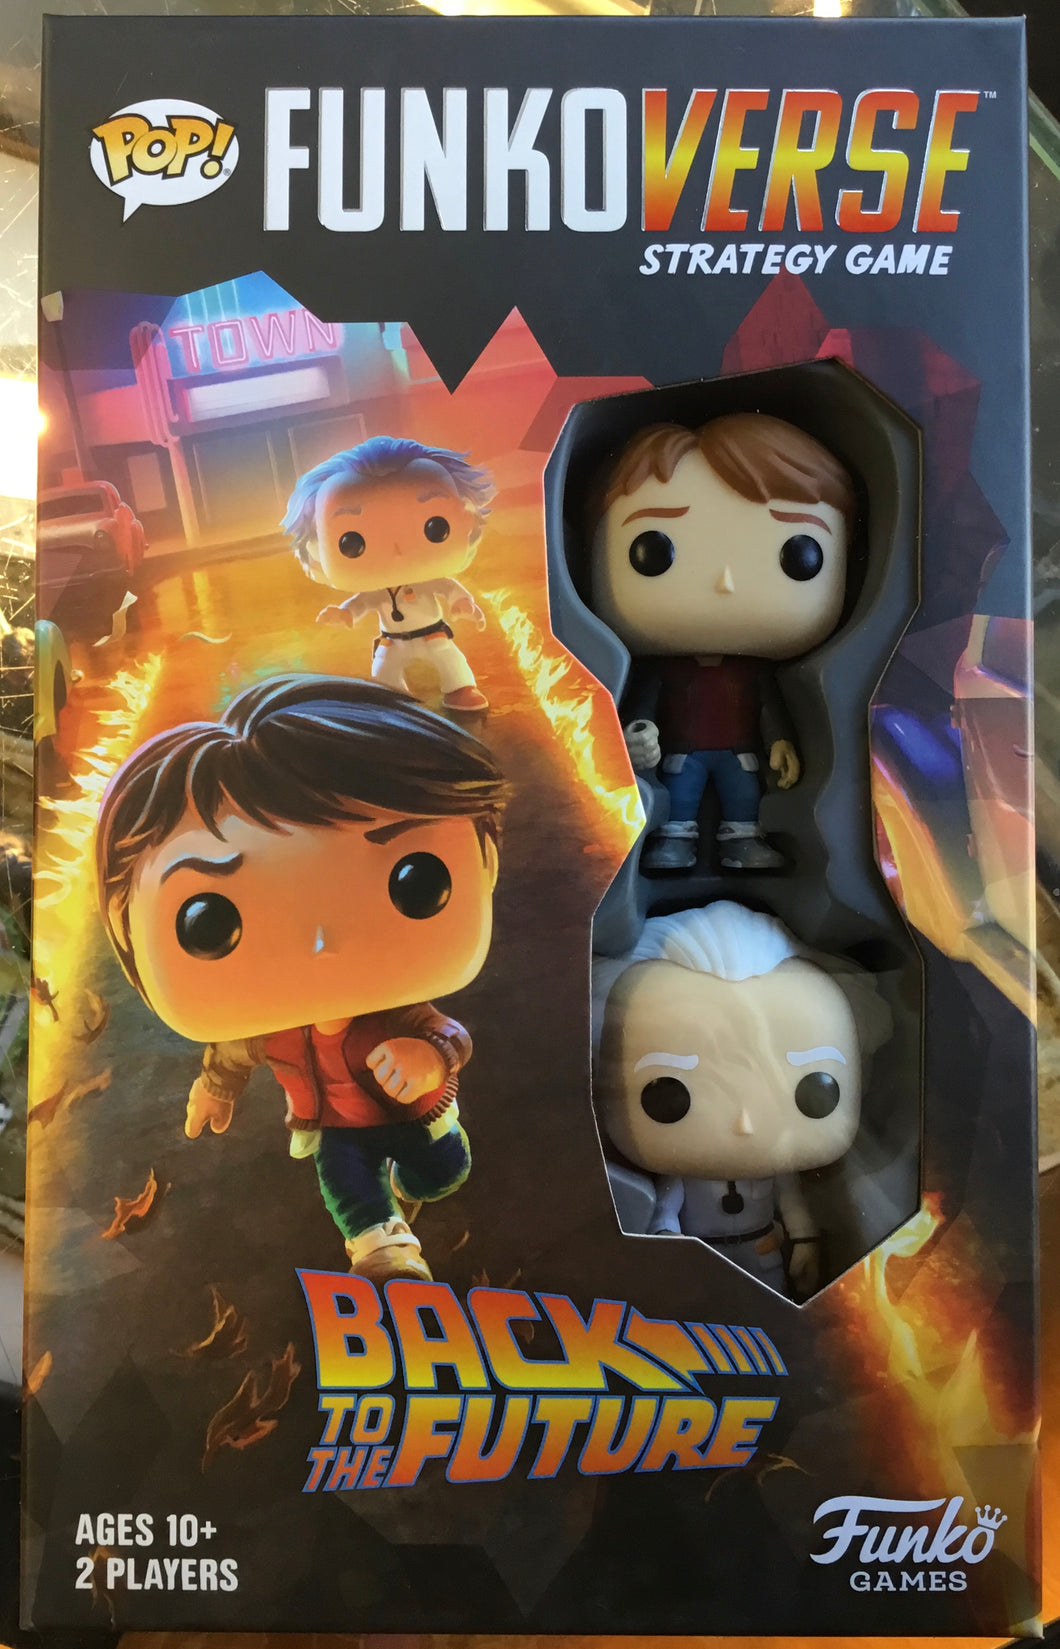 Back to the Future Pop Funko-verse Strategy Game